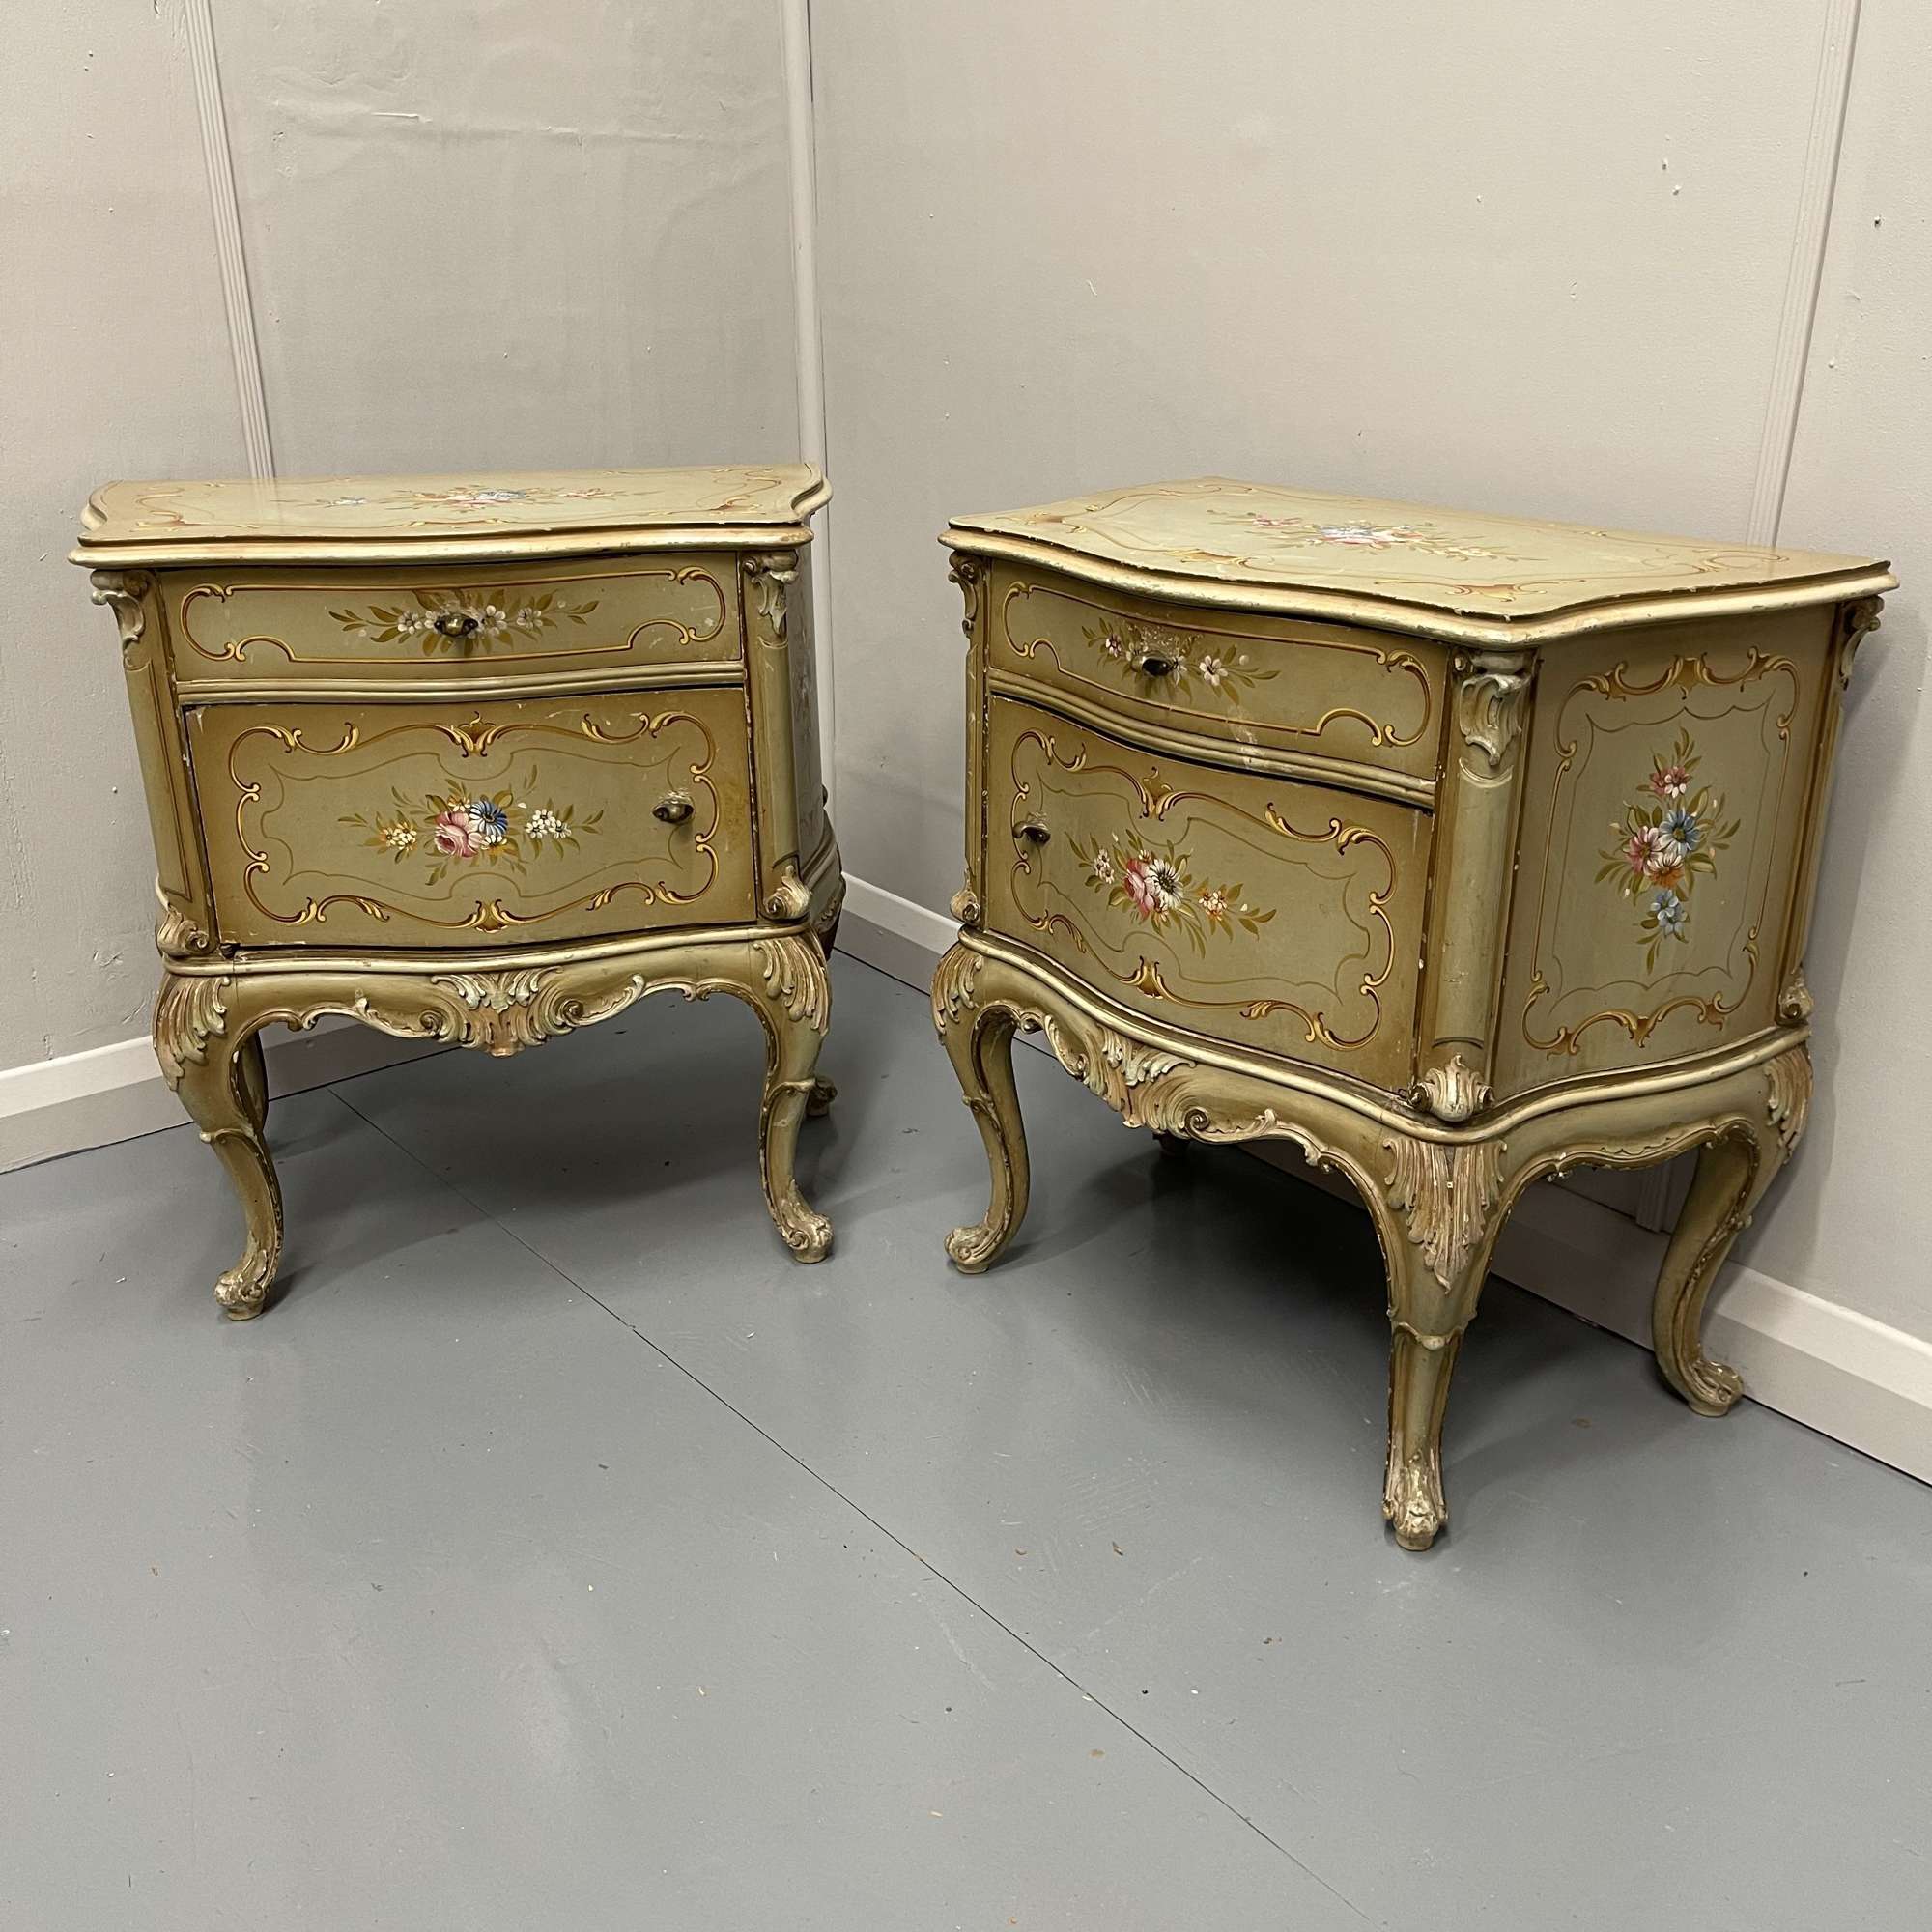 Pair Of Venetian Antique Bedside Cabinets Or Lamp Tables